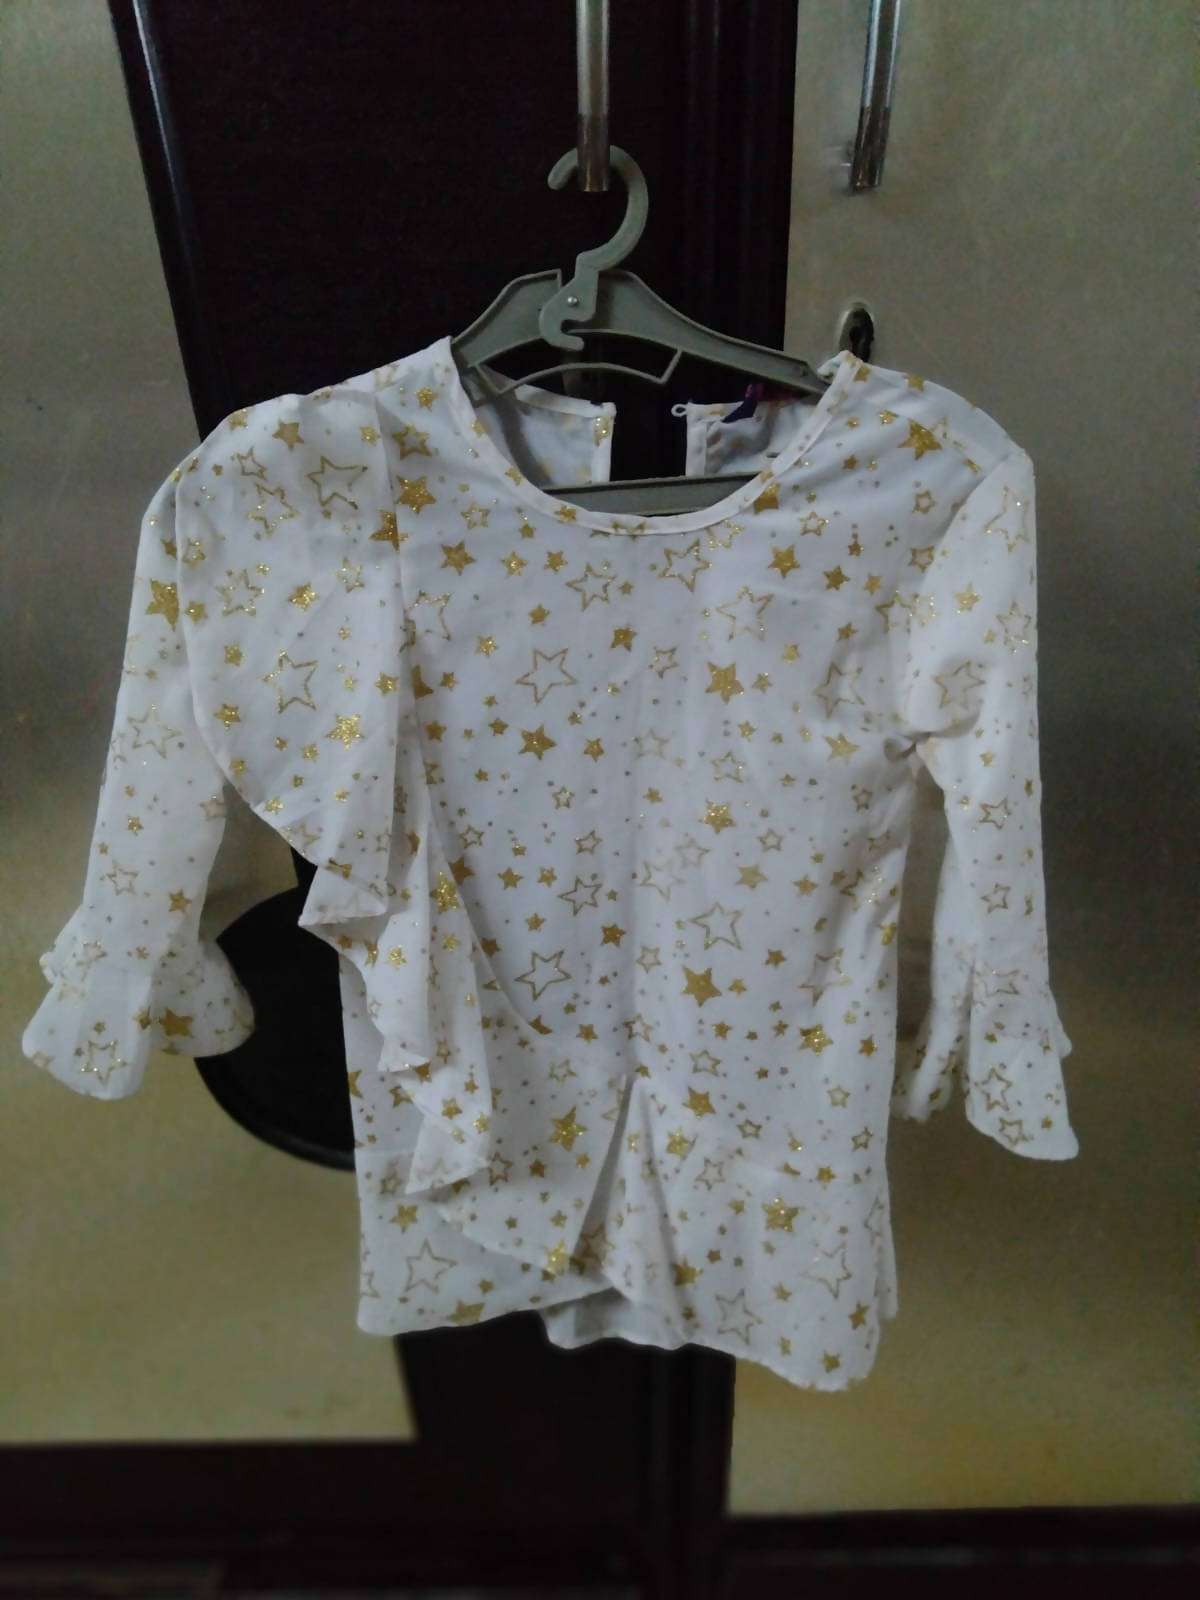 Party Wear Girls Top For 7-8 Years Girl - PyaraBaby